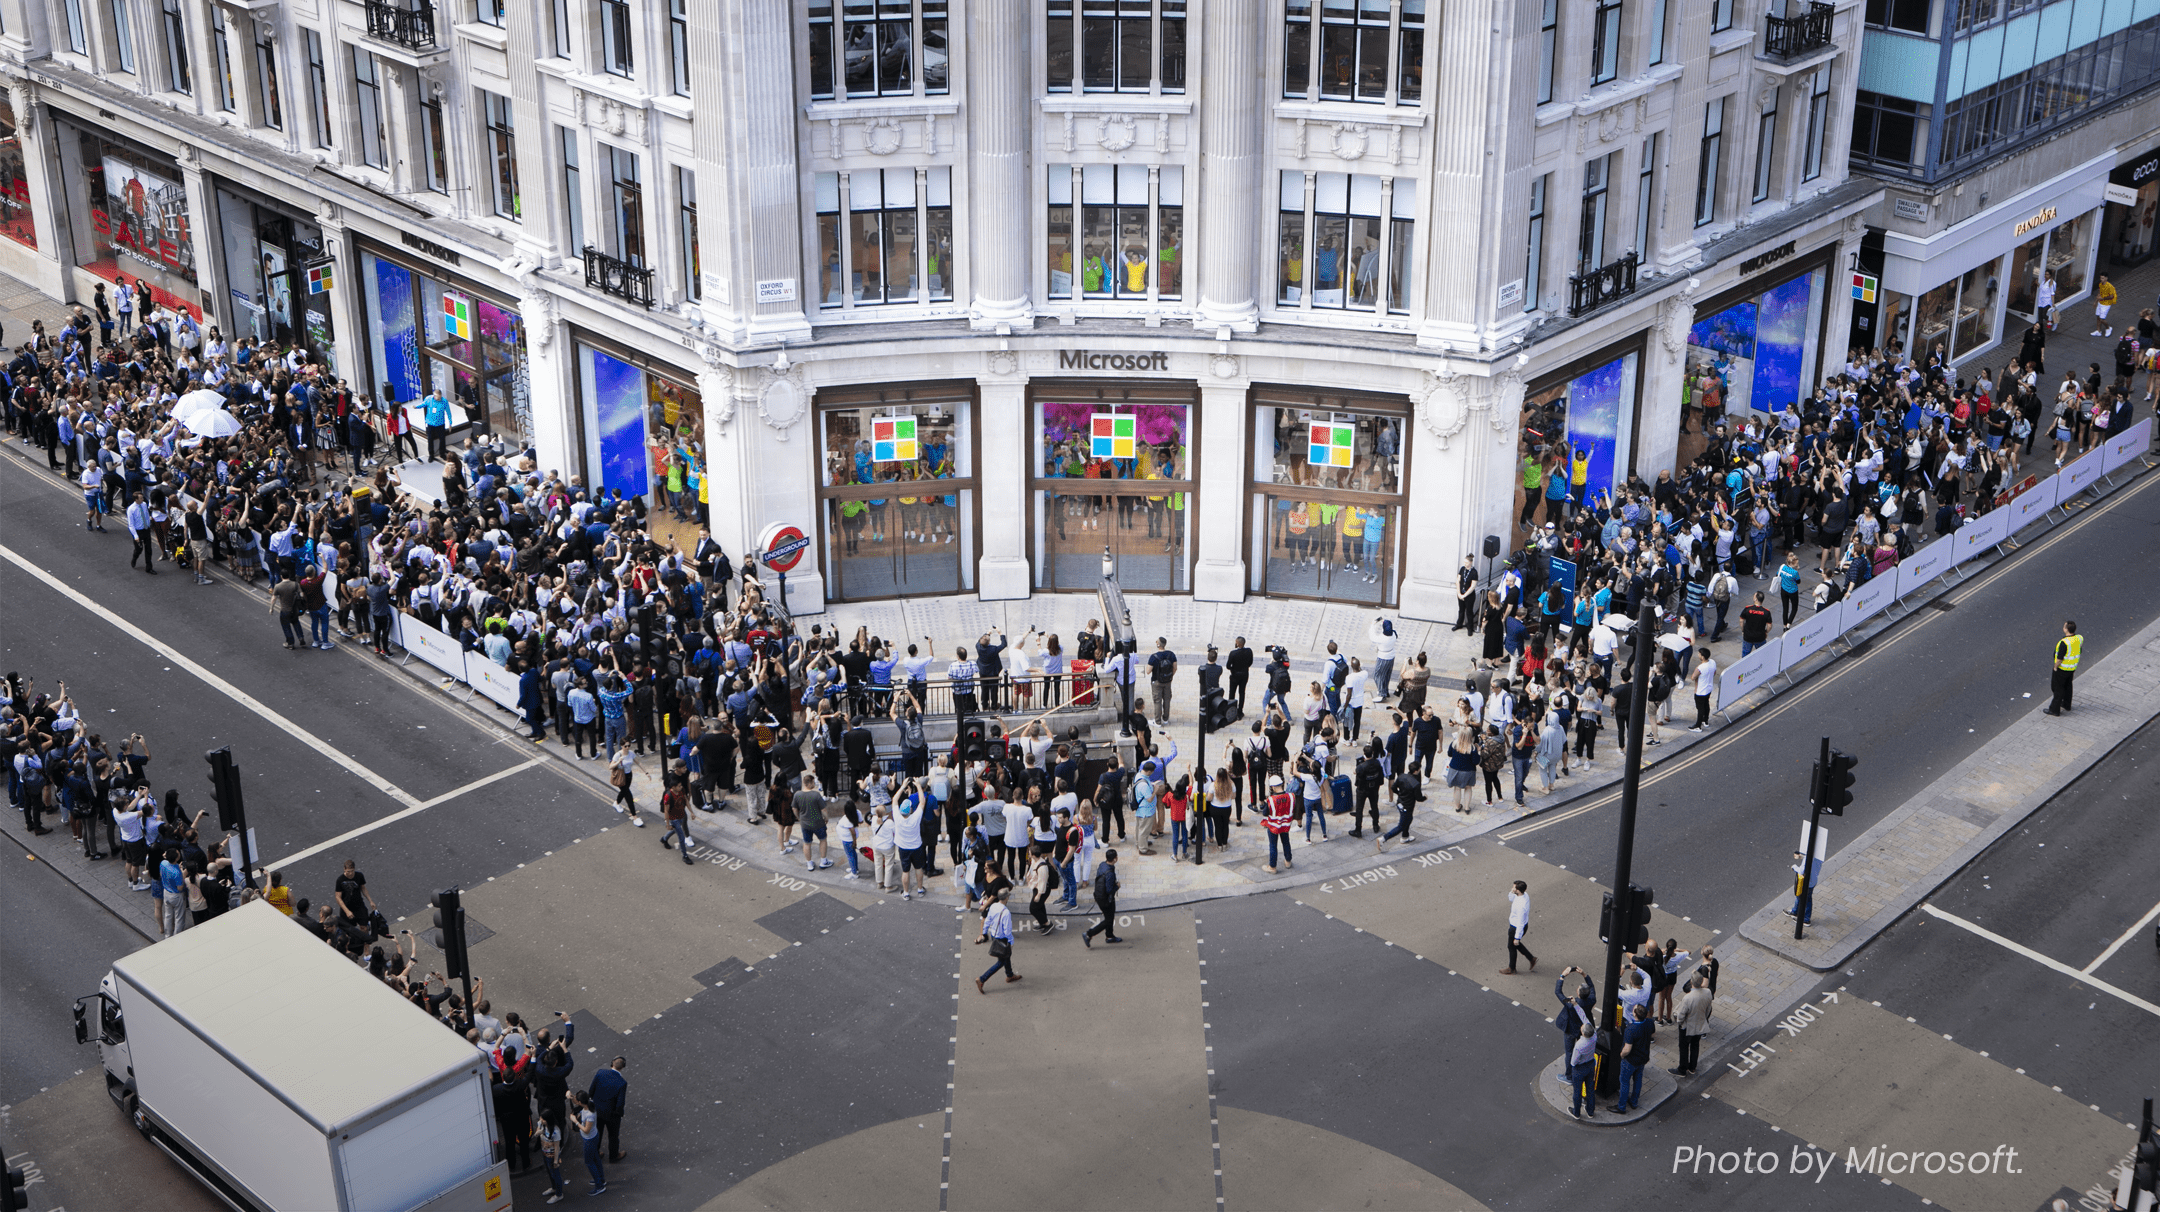 Here’s What’s Inside Microsoft’s London Flagship Store